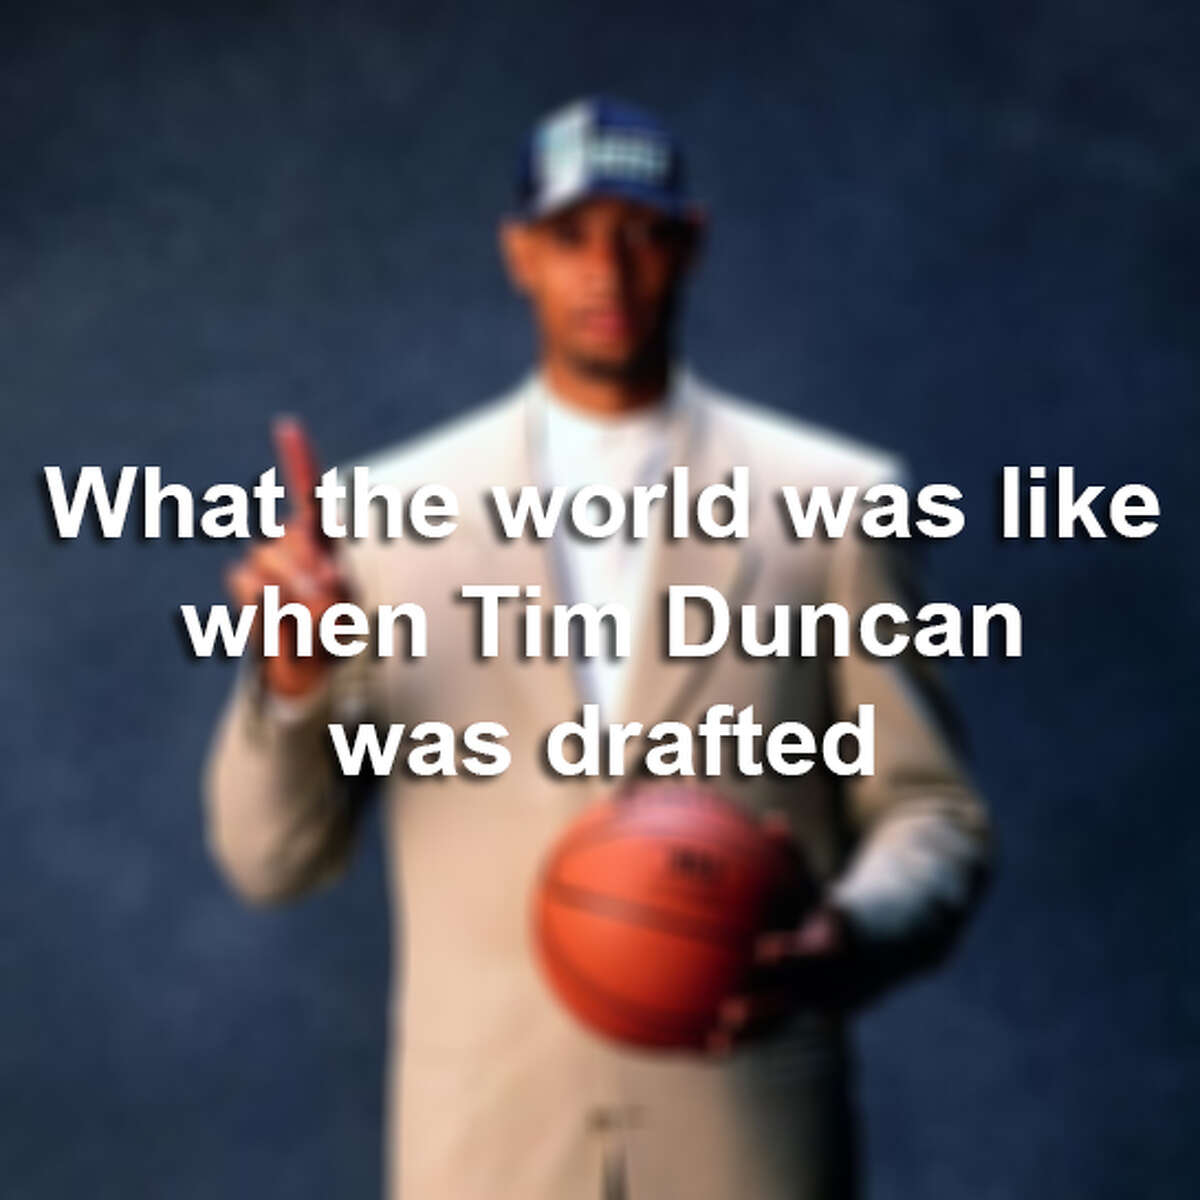 Eighteen years ago, this baby face was just a Wake Forest grad with no championship rings to his name. But, he was the No. 1 draft pick of 1997. Click through the following gallery to see what the world looked like when Tim Duncan became a Spur.